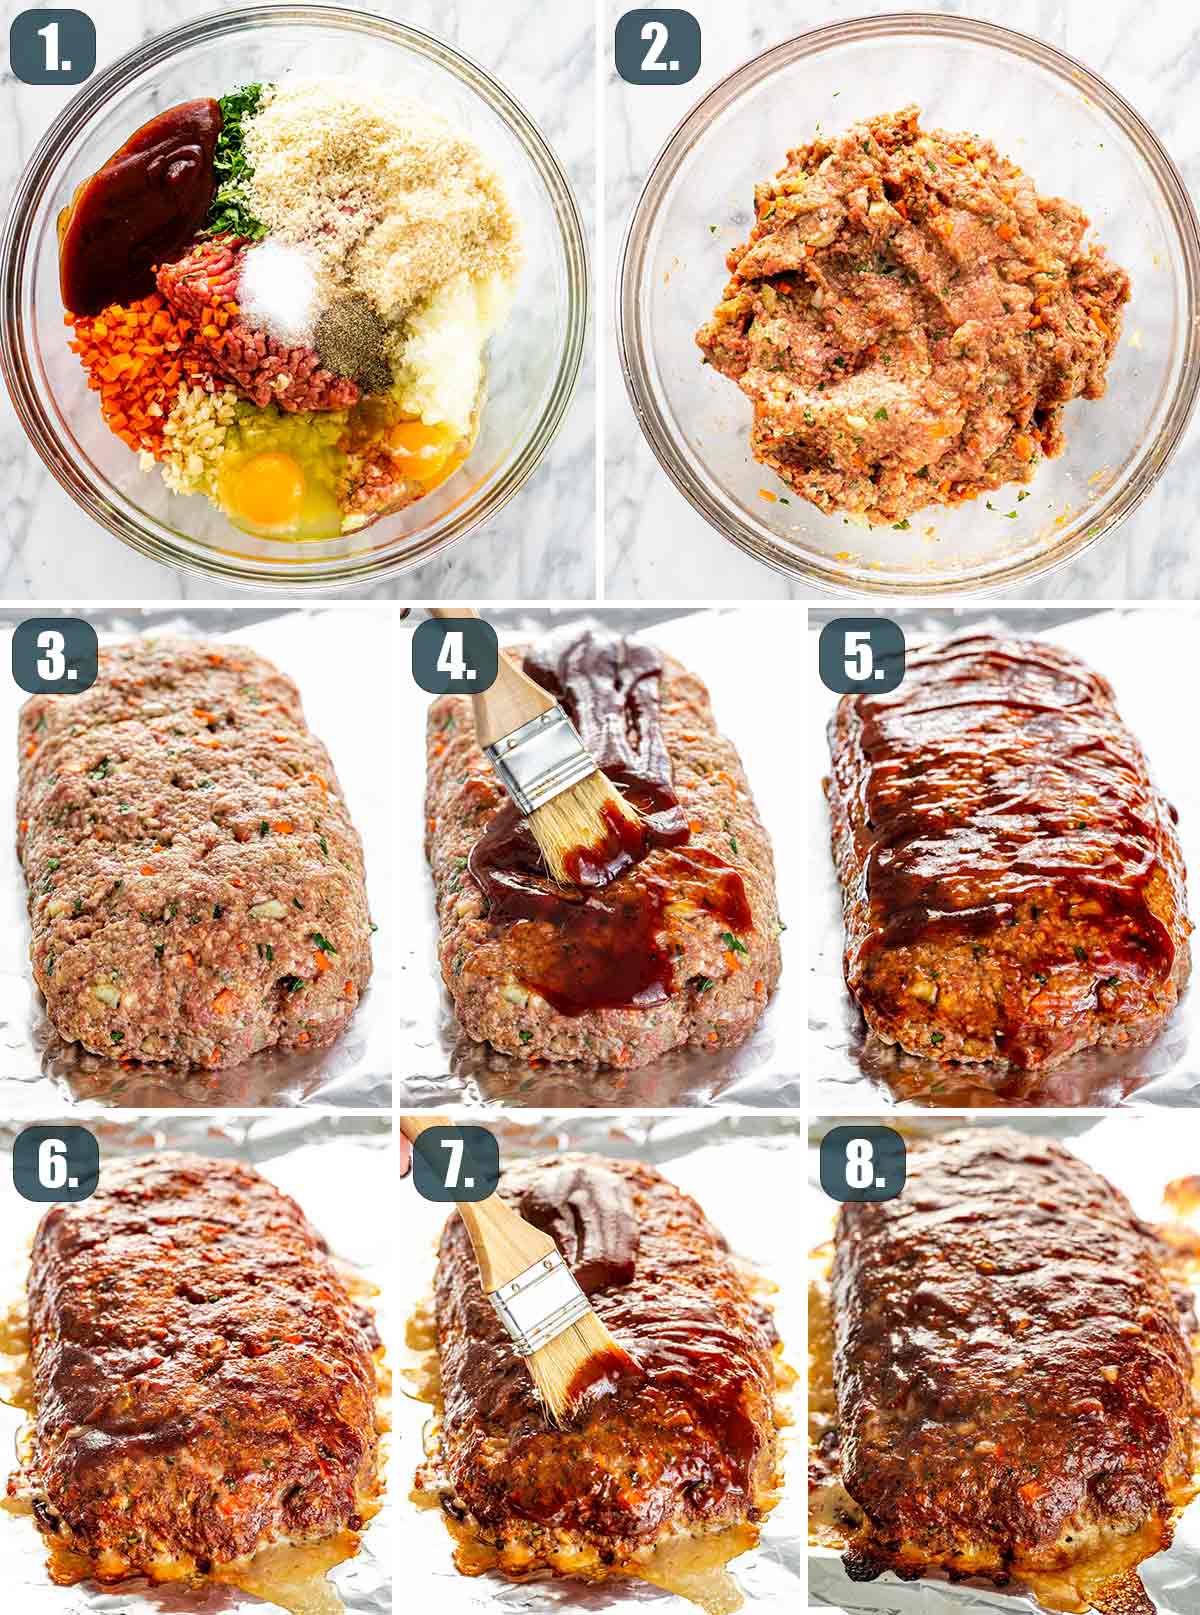 detailed process shot showing how to make meatloaf.